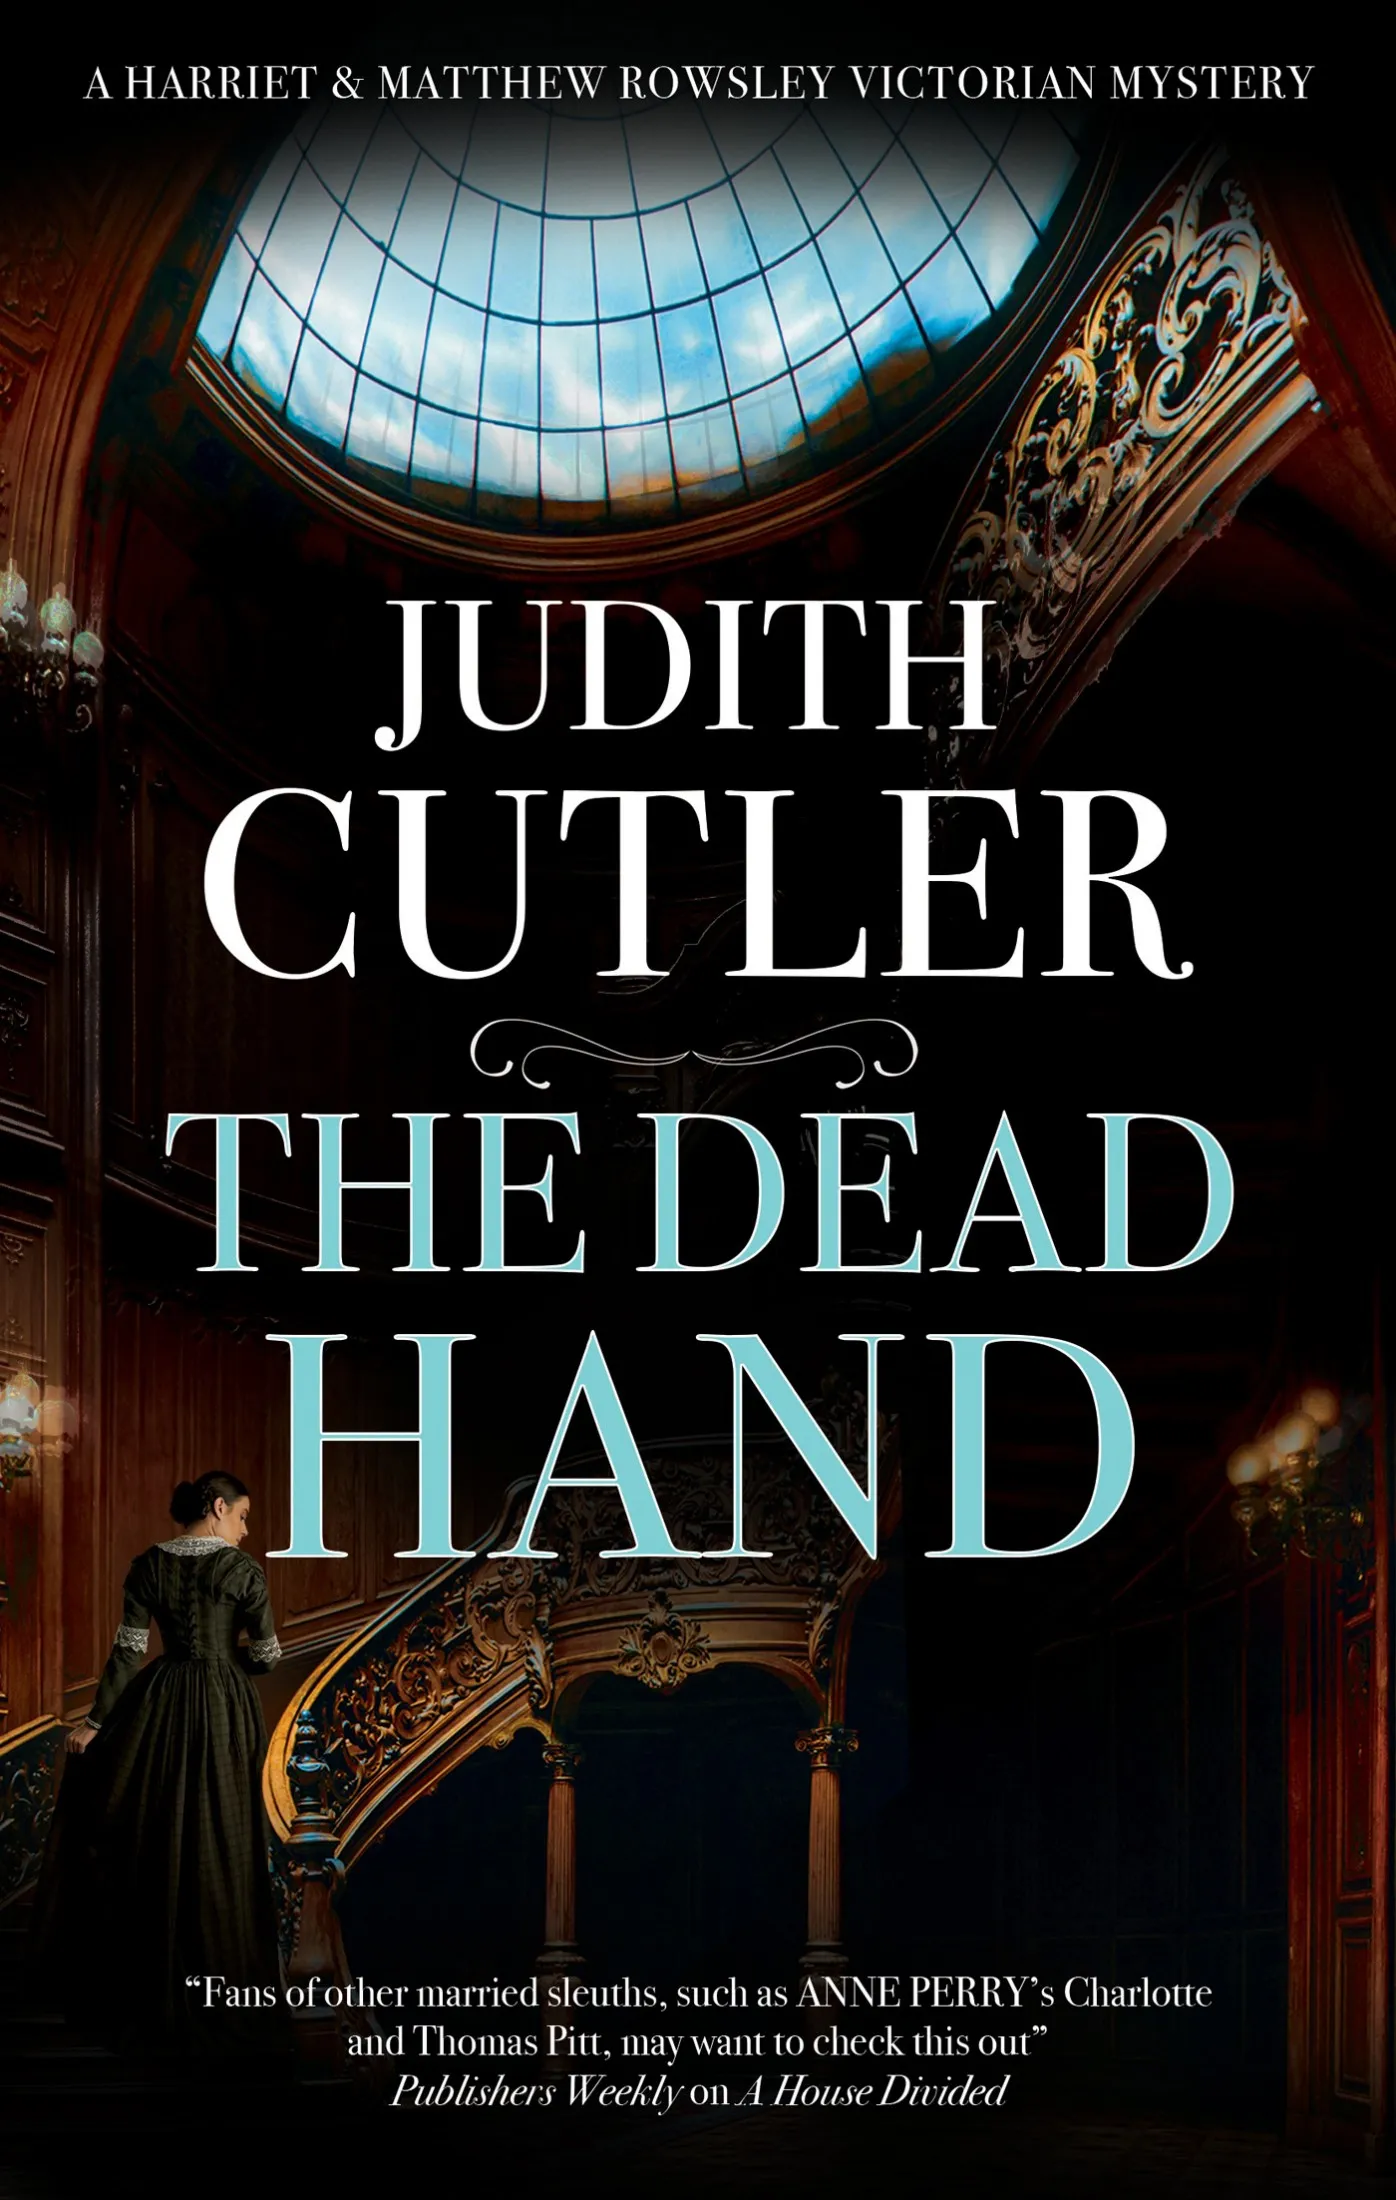 The Dead Hand (A Harriet & Matthew Rowsley Victorian Mystery)